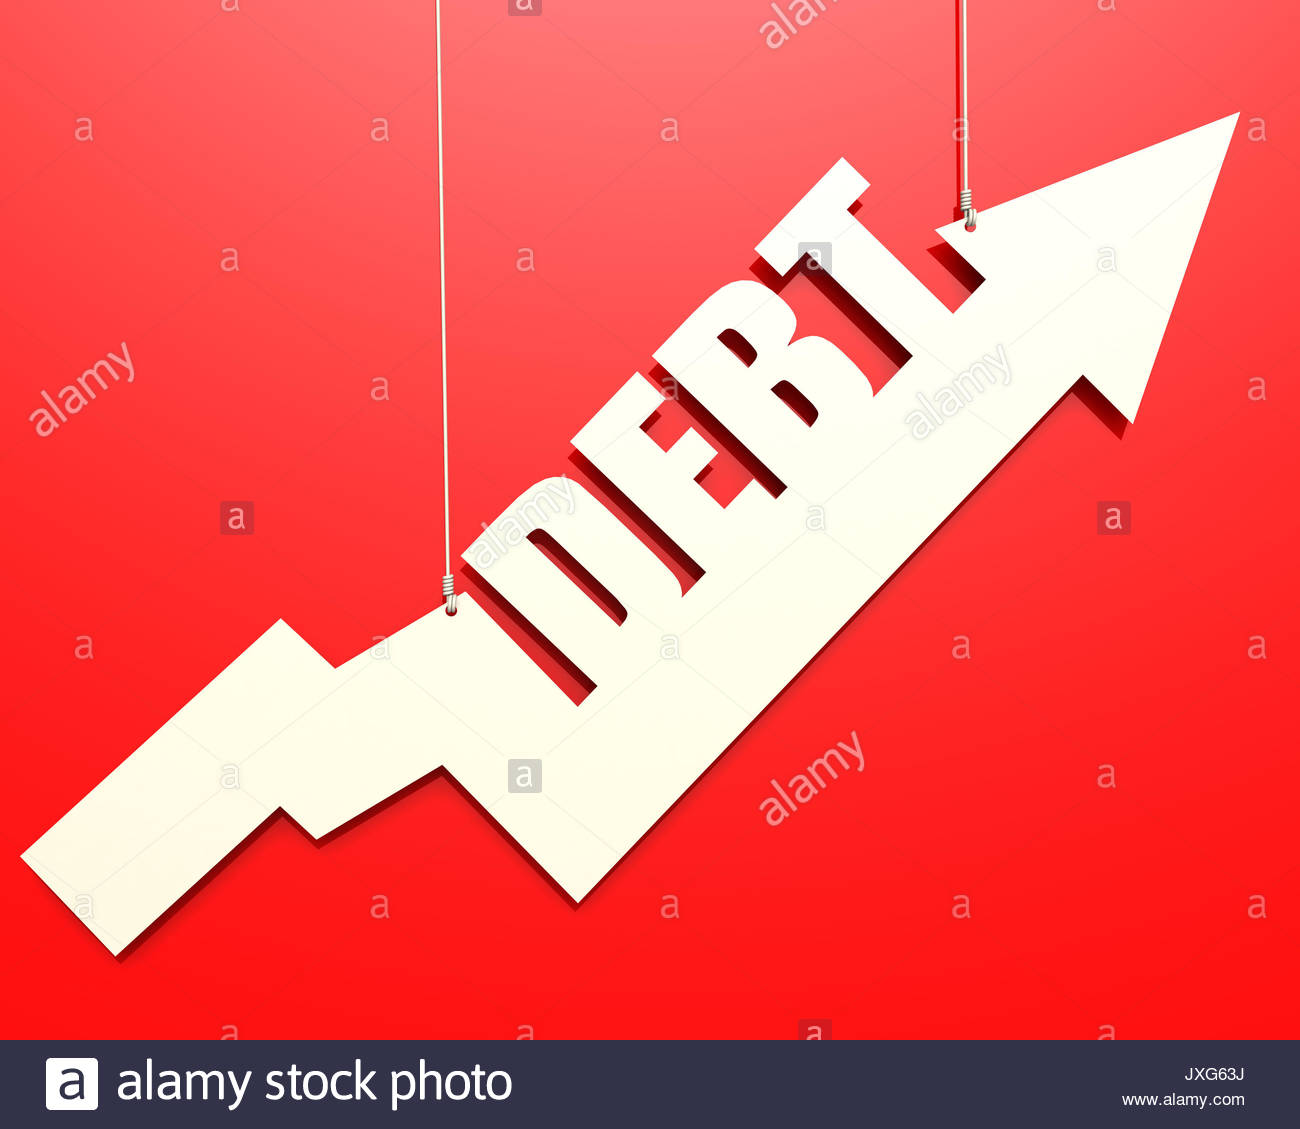 White Arrow With Debt Word Hang On Red Background Image Hi